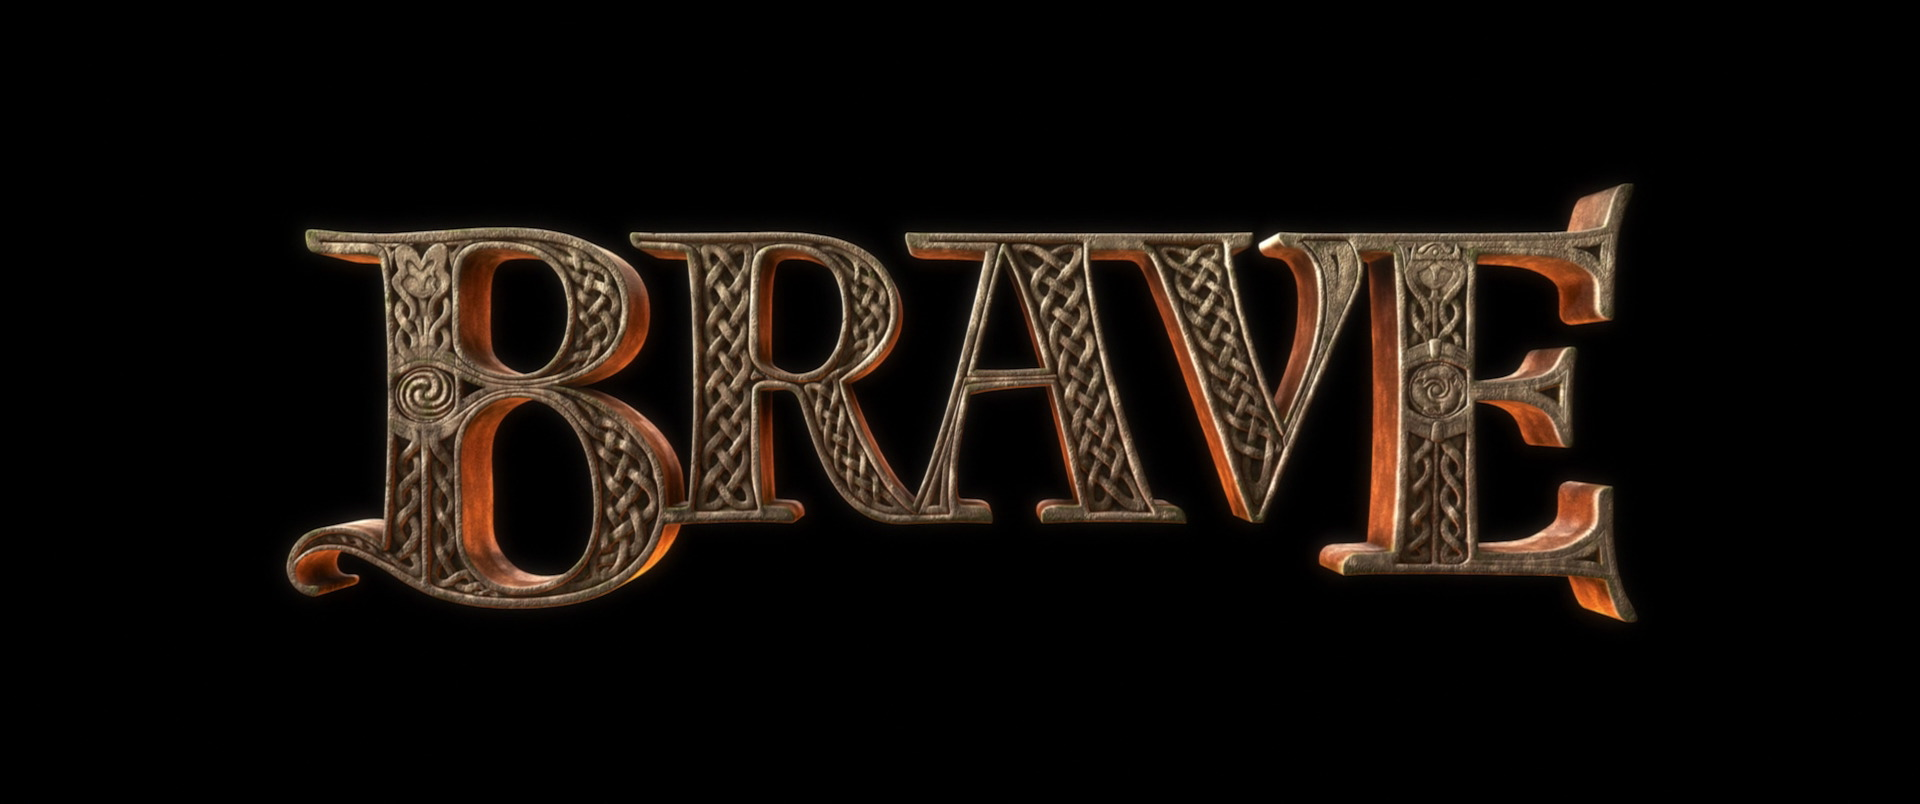 brave 1.52.126 for mac download